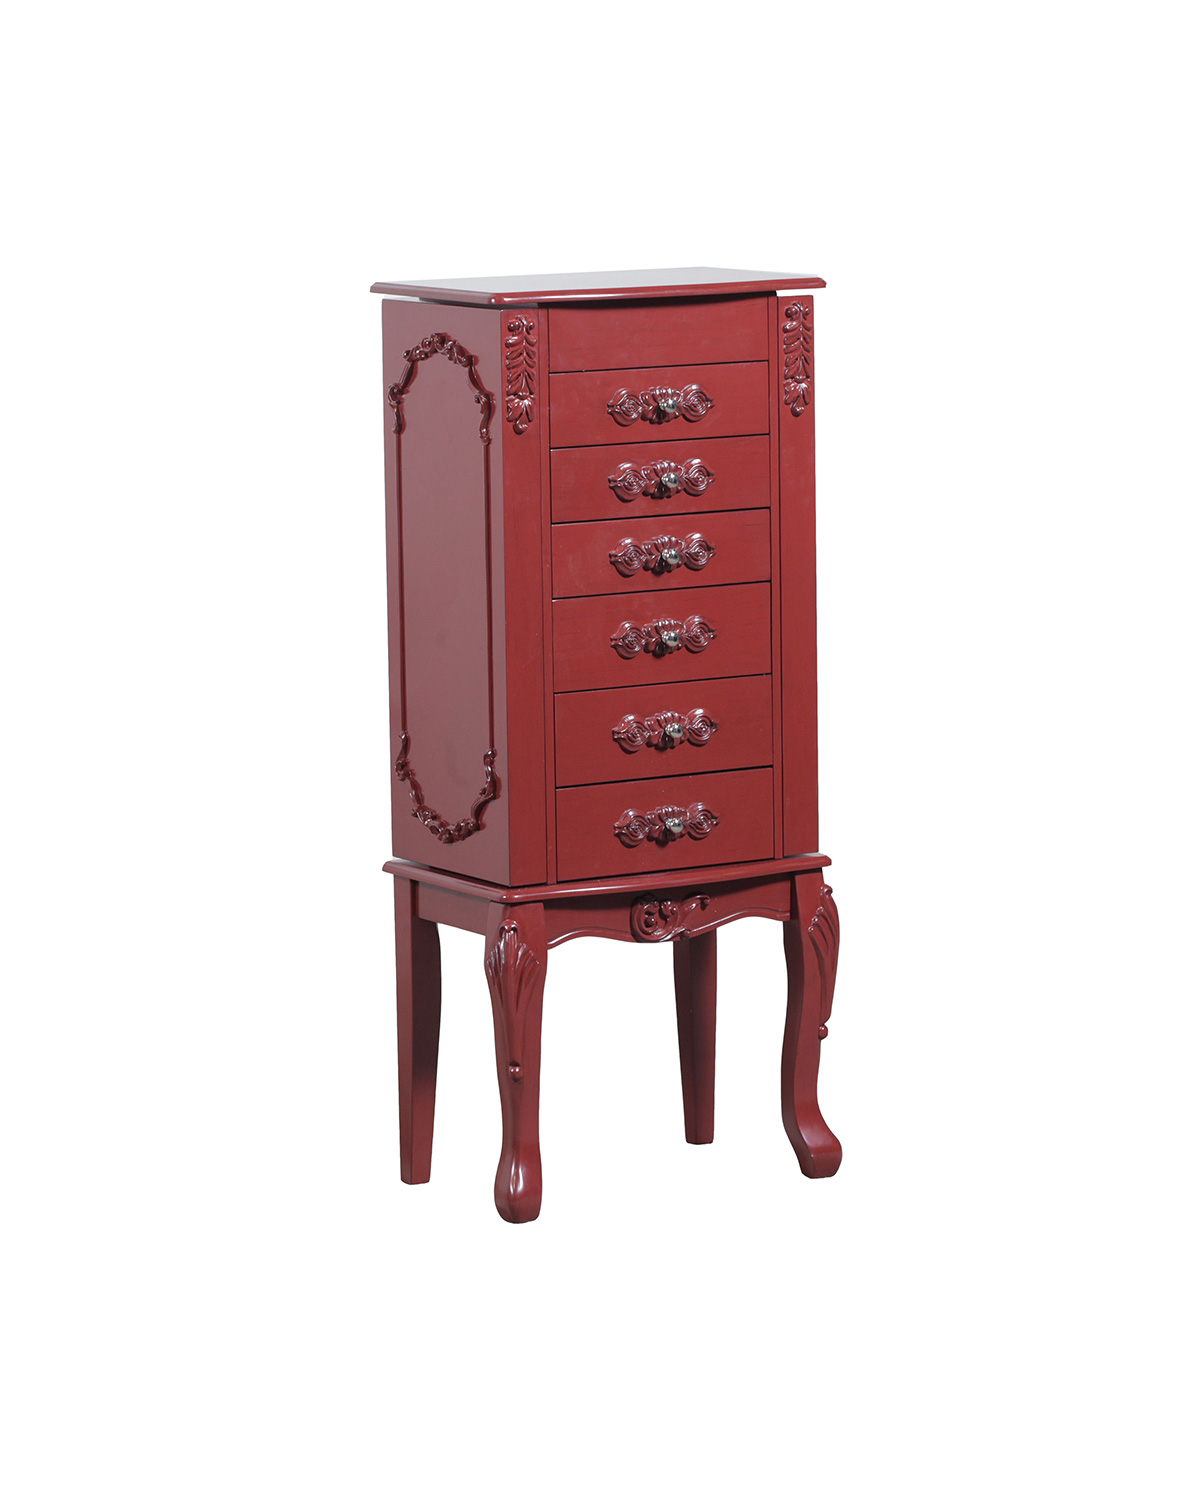 Powell Braelyn Jewelry Armoire - Red